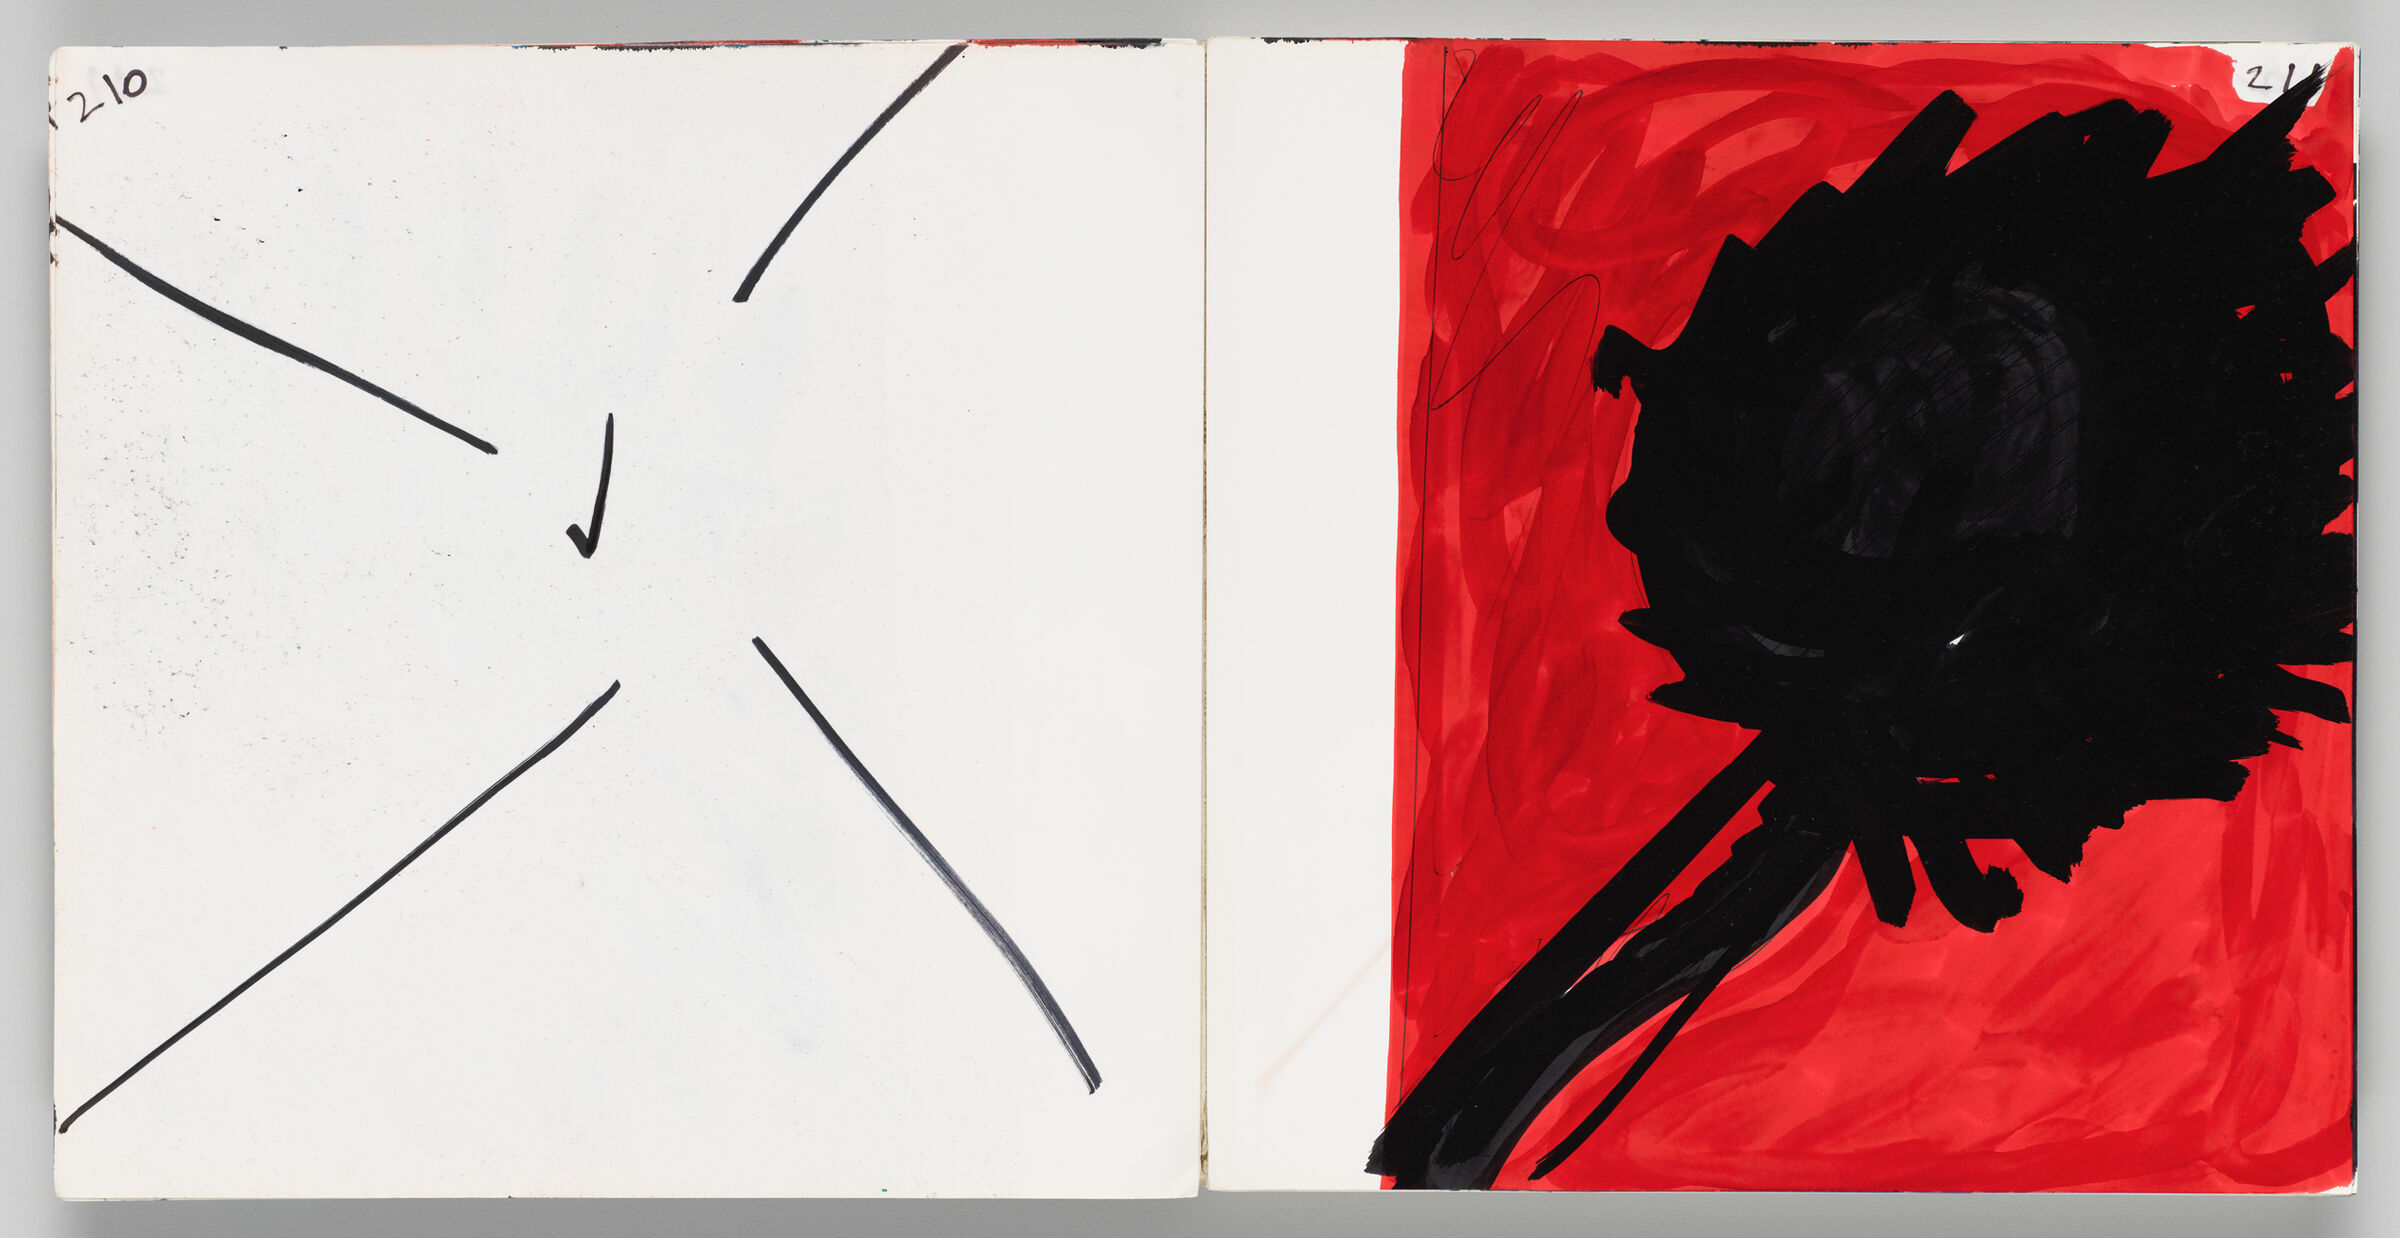 Untitled (Lines And Checkmark, Left Page); Untitled (Sketch Of Painting, Right Page)